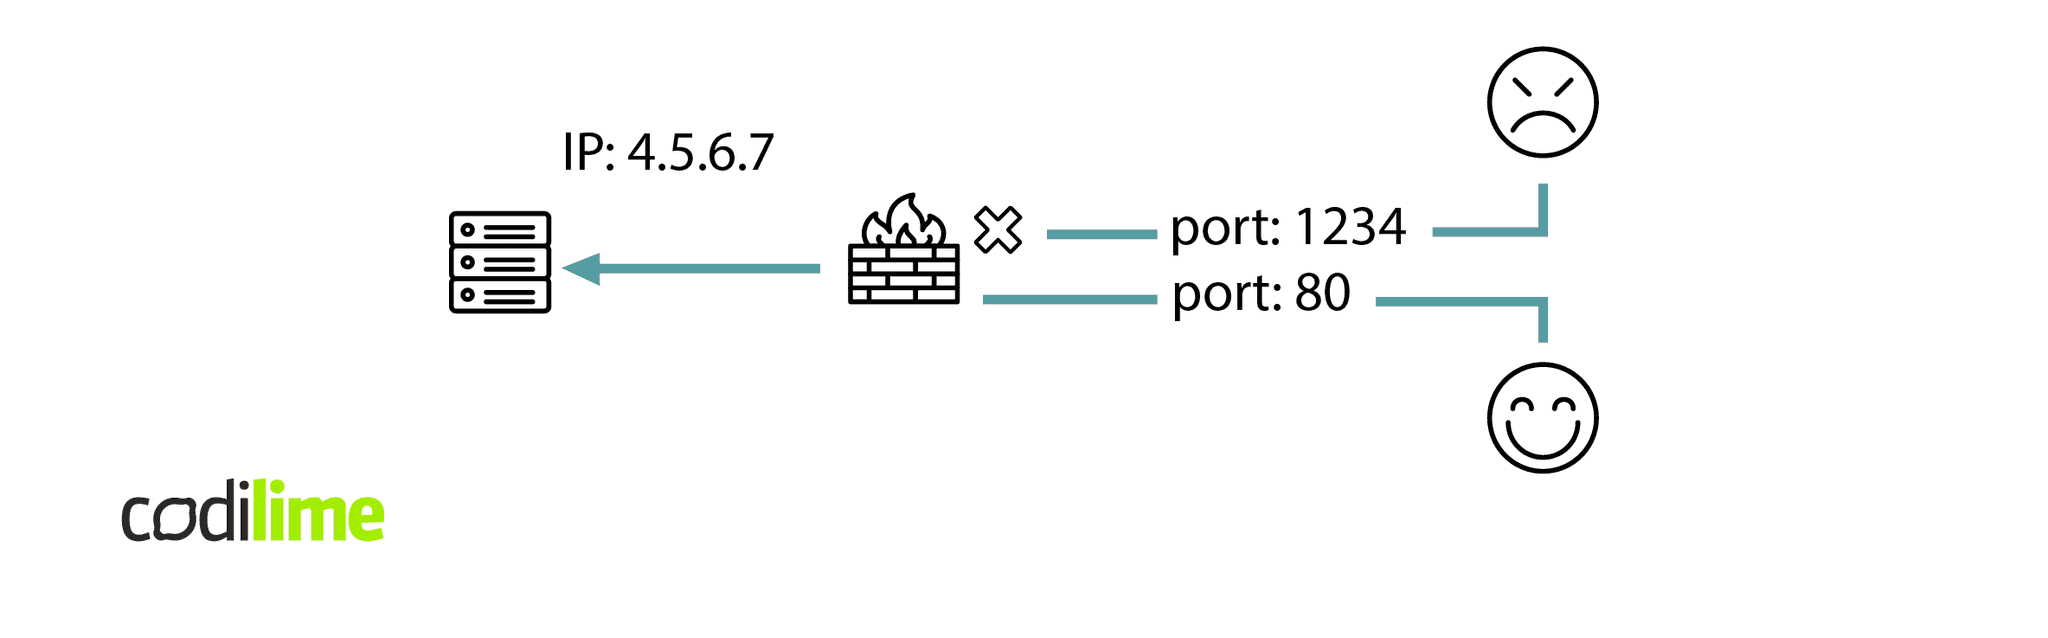 A firewall usage example